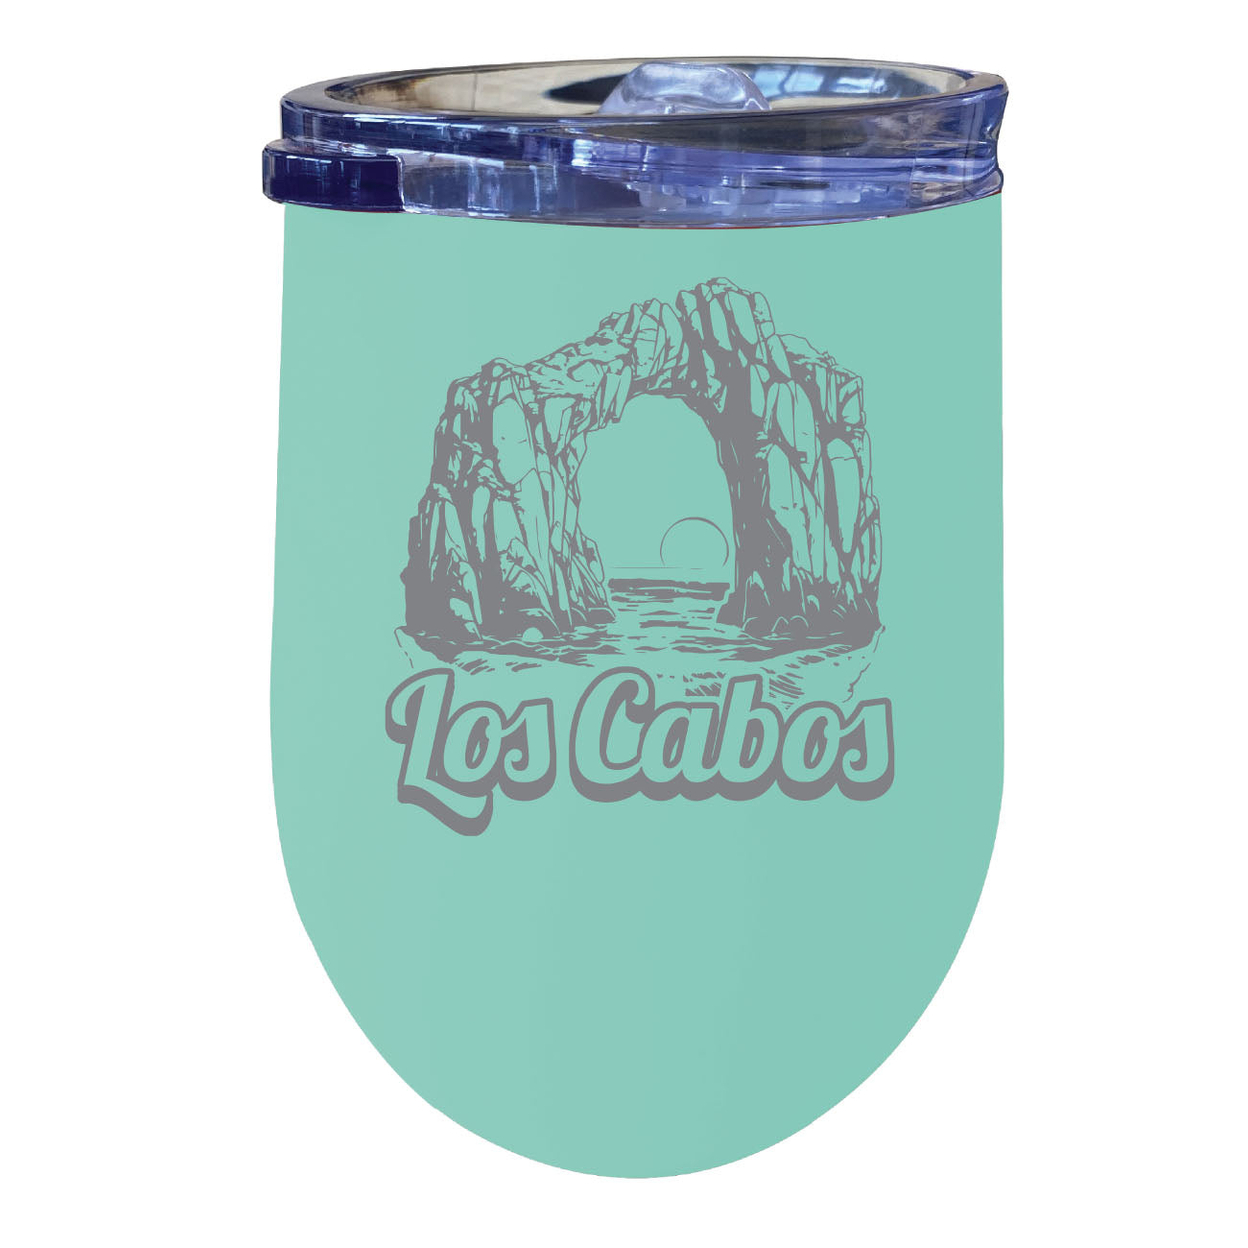 Los Cabos Mexico Souvenir 12 Oz Engraved Insulated Wine Stainless Steel Tumbler - Navy,,2-Pack